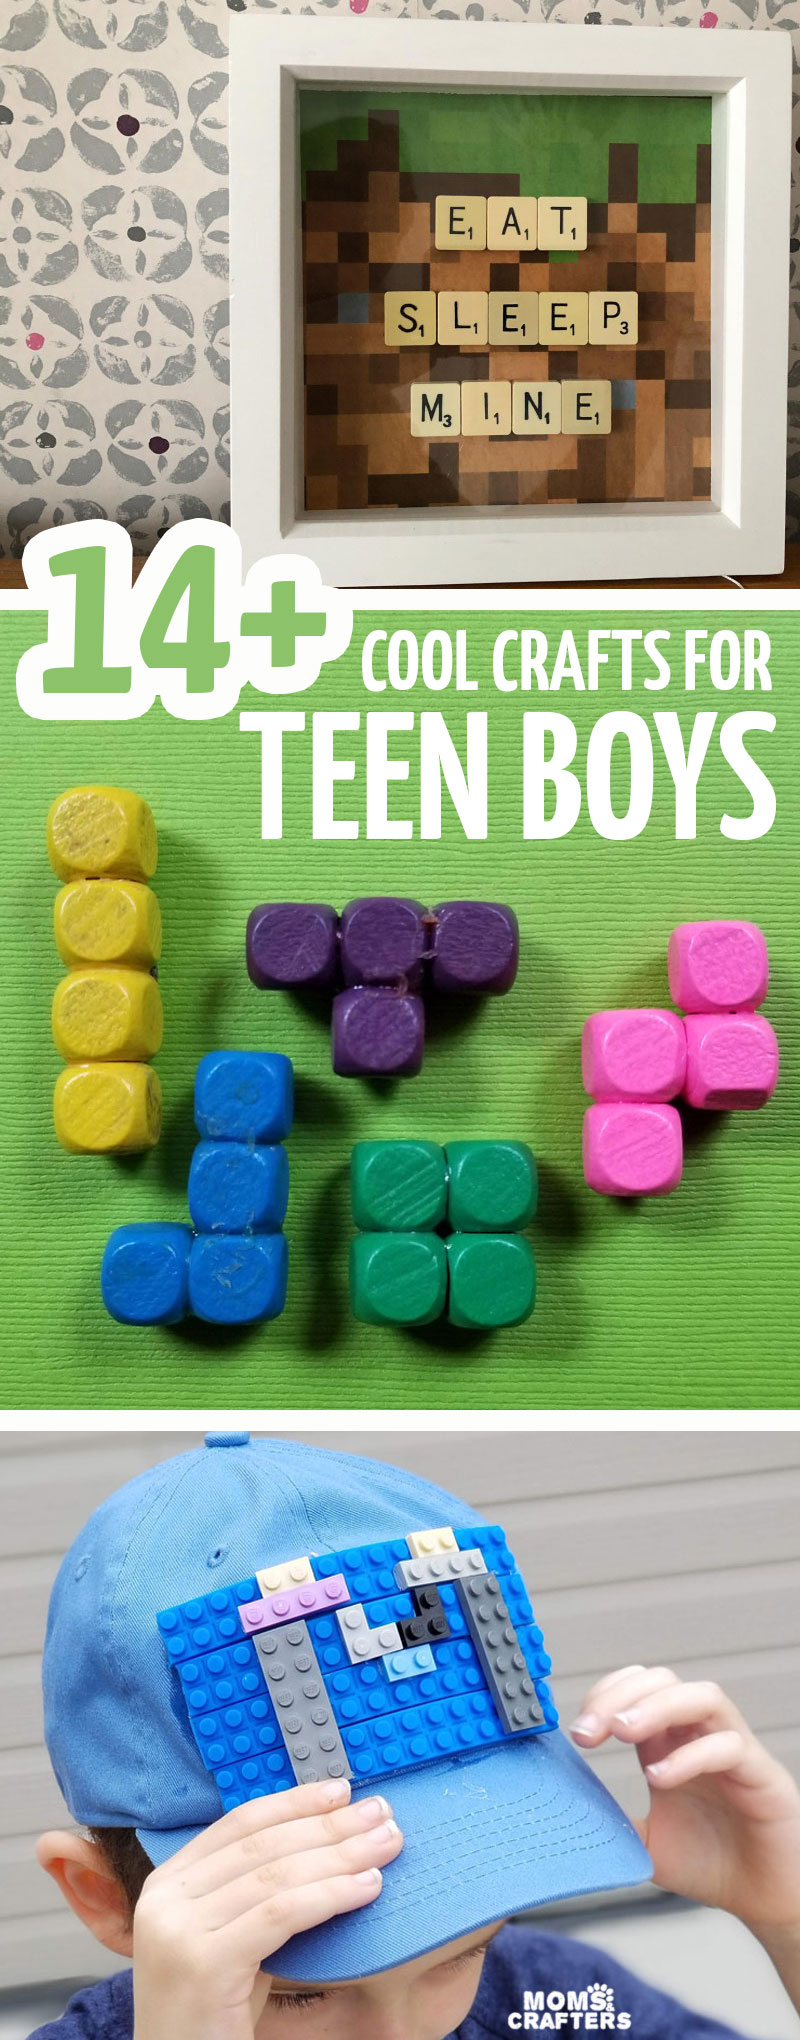 25 Awesome Projects for Tween and Teen Boys (Ages 10 and Up) - Frugal Fun  For Boys and Girls